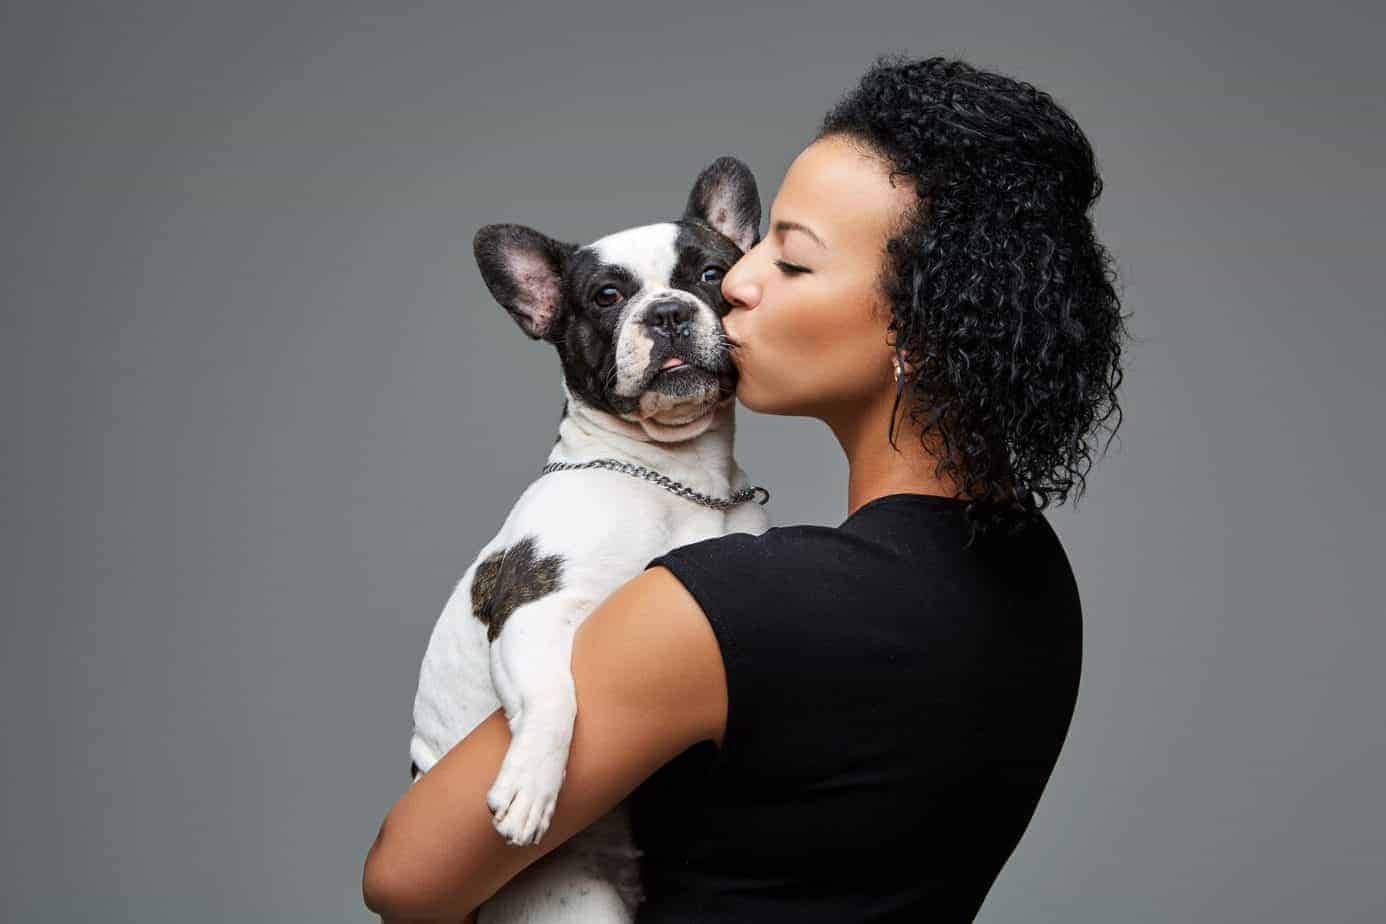 Woman kisses French bulldog. Canadian dog owners use CBD dog treats, sprays, and drops to treat anxiety, arthritis, osteoporosis, and epilepsy.